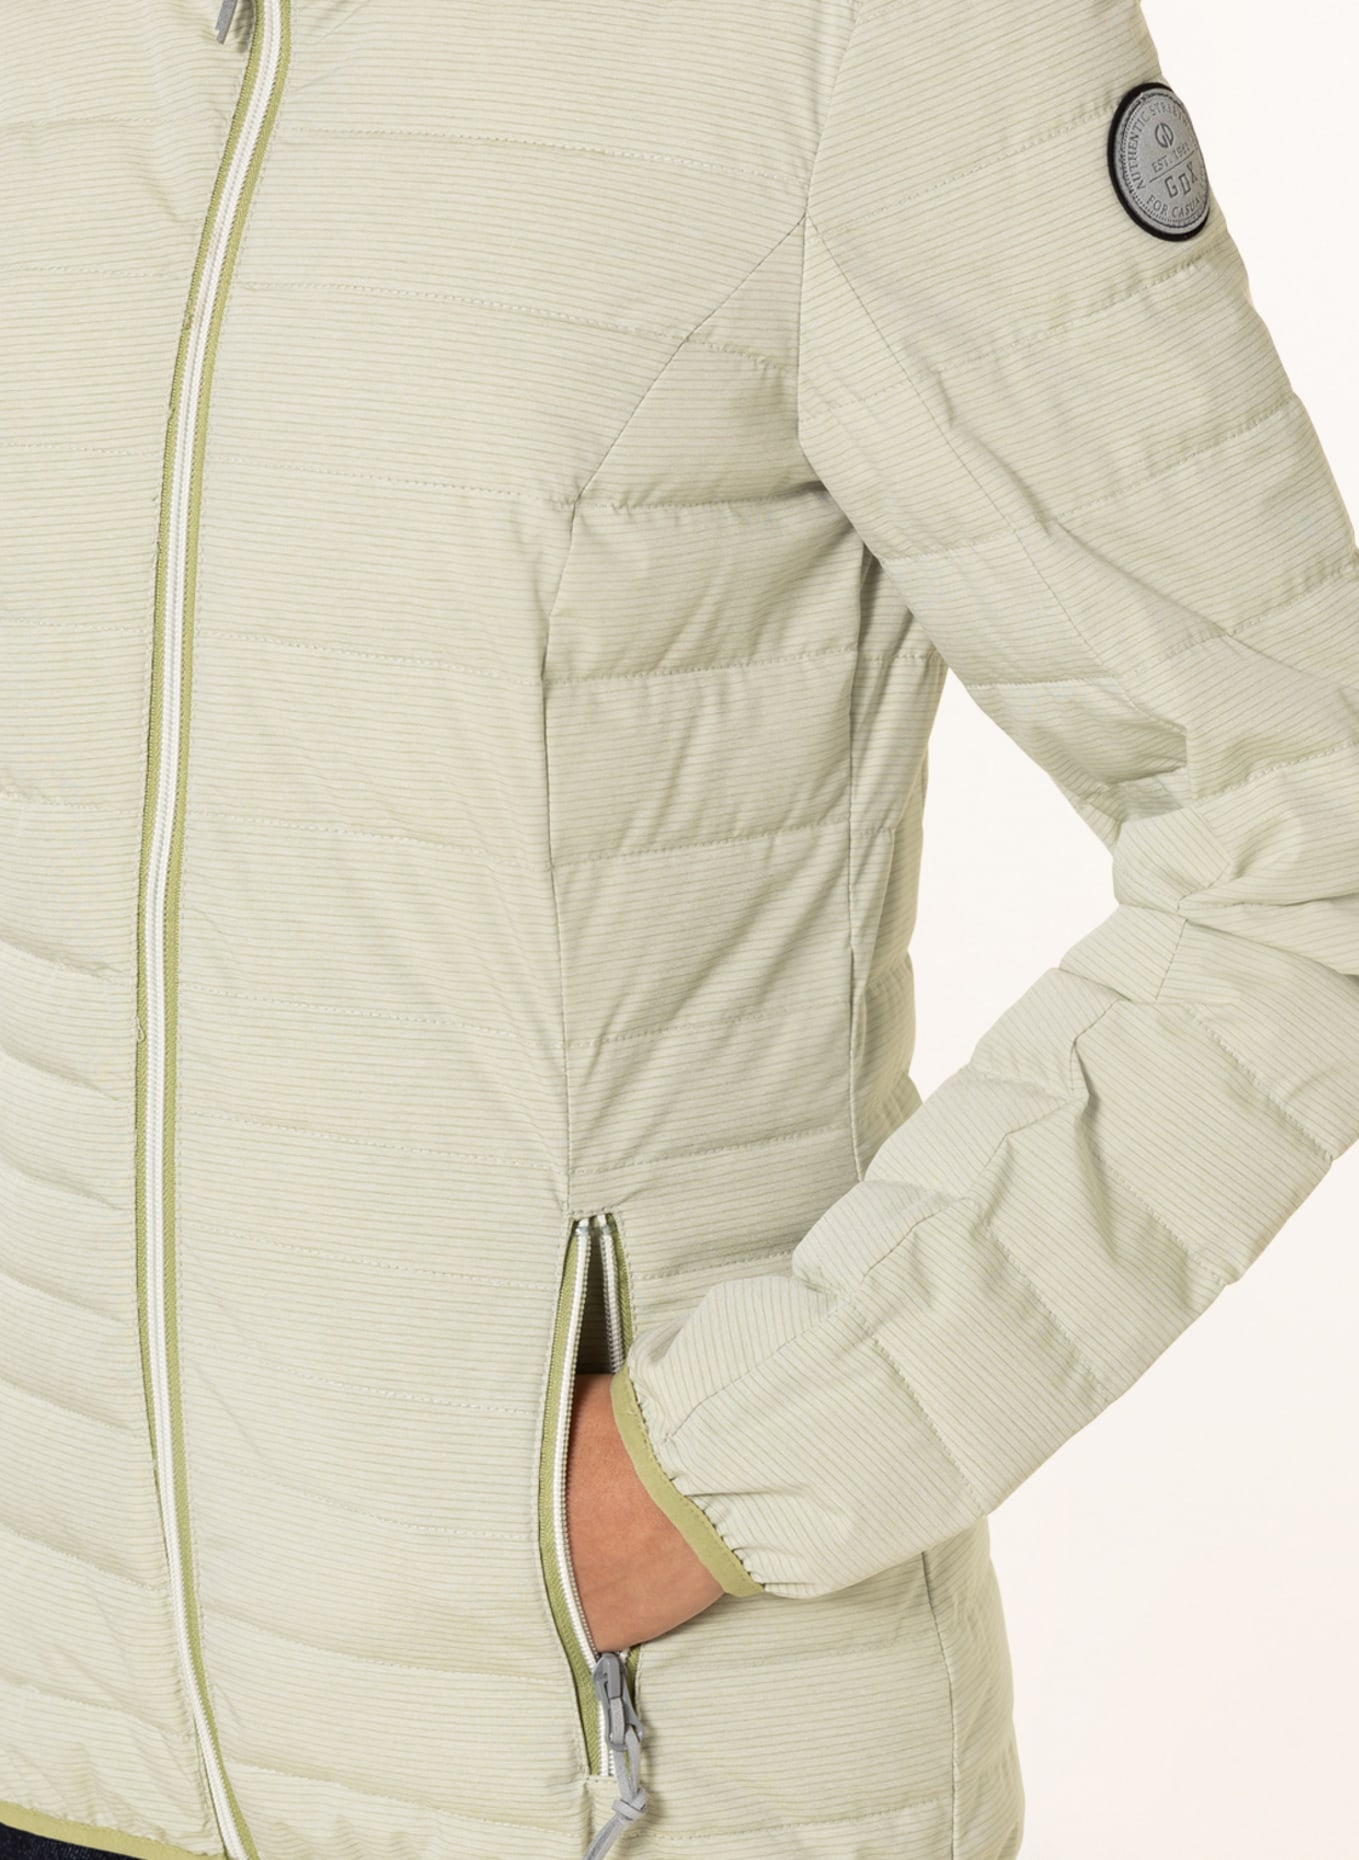 UYAKA light by Quilted green killtec jacket G.I.G.A. in DX